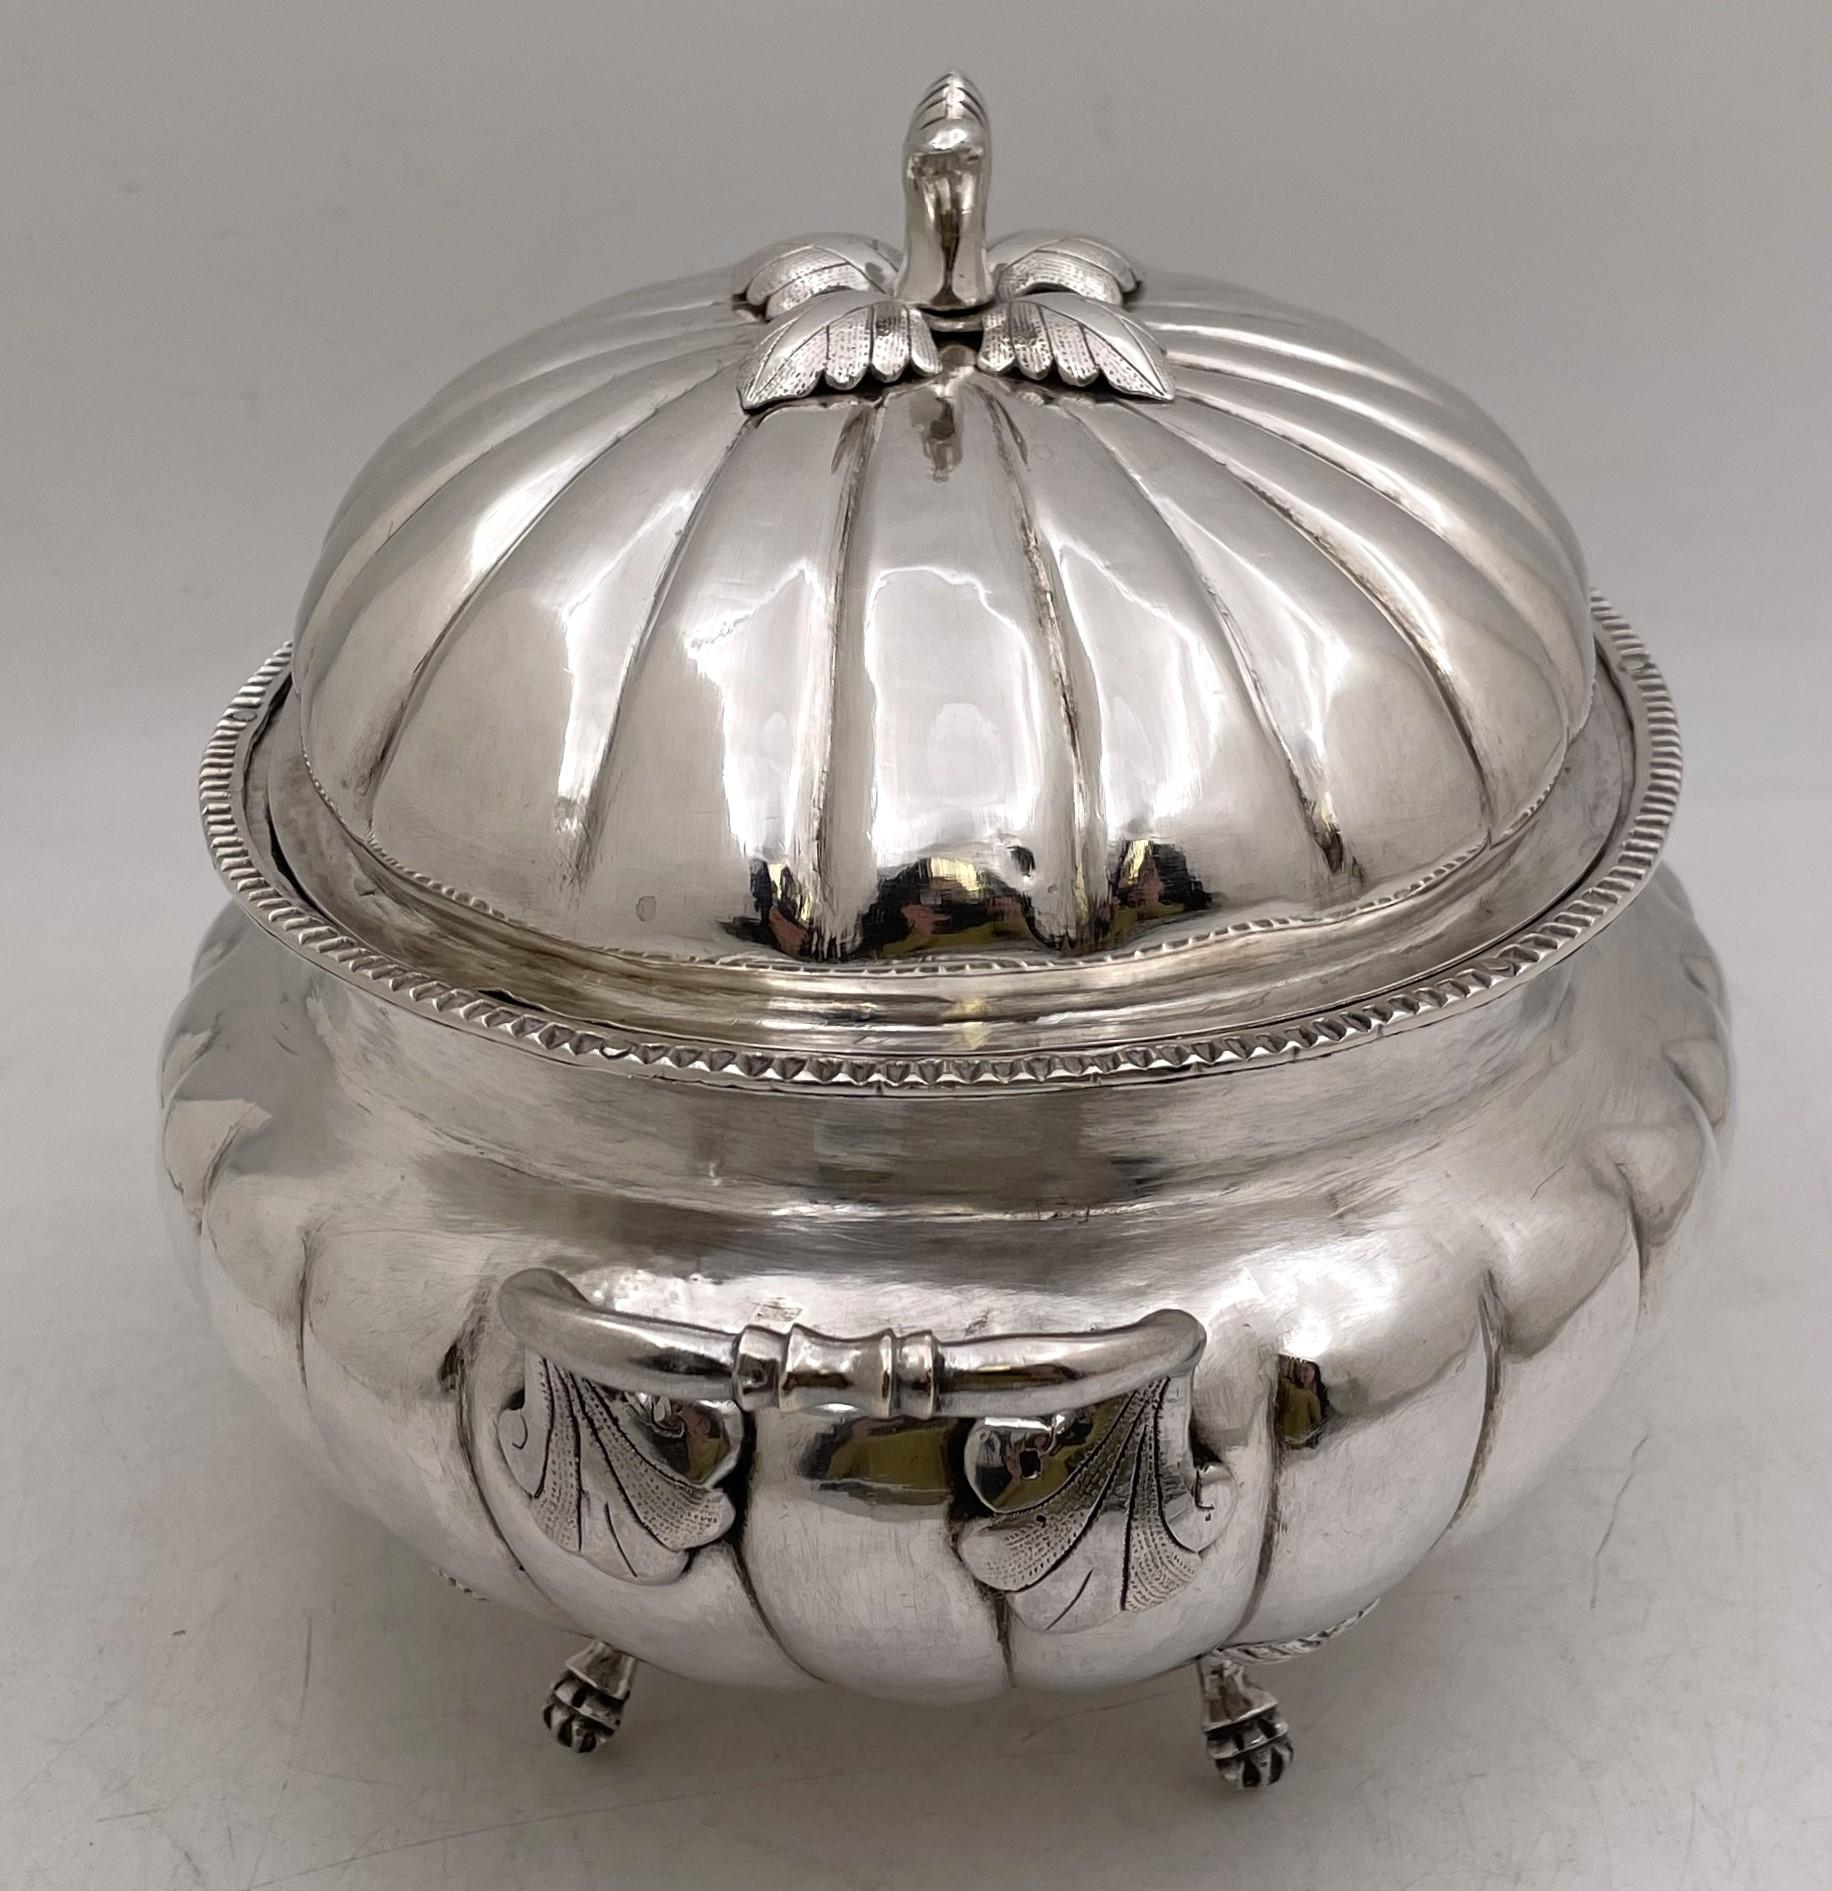 South America, probably Peruvian, silver tureen with its cover, from the 19th century, hand chased and in ovoid form, standing on 4 pawed feet, and exhibiting a finial with natural motifs. It measures 8 1/2'' in height with the lid (5 1/2'' without)